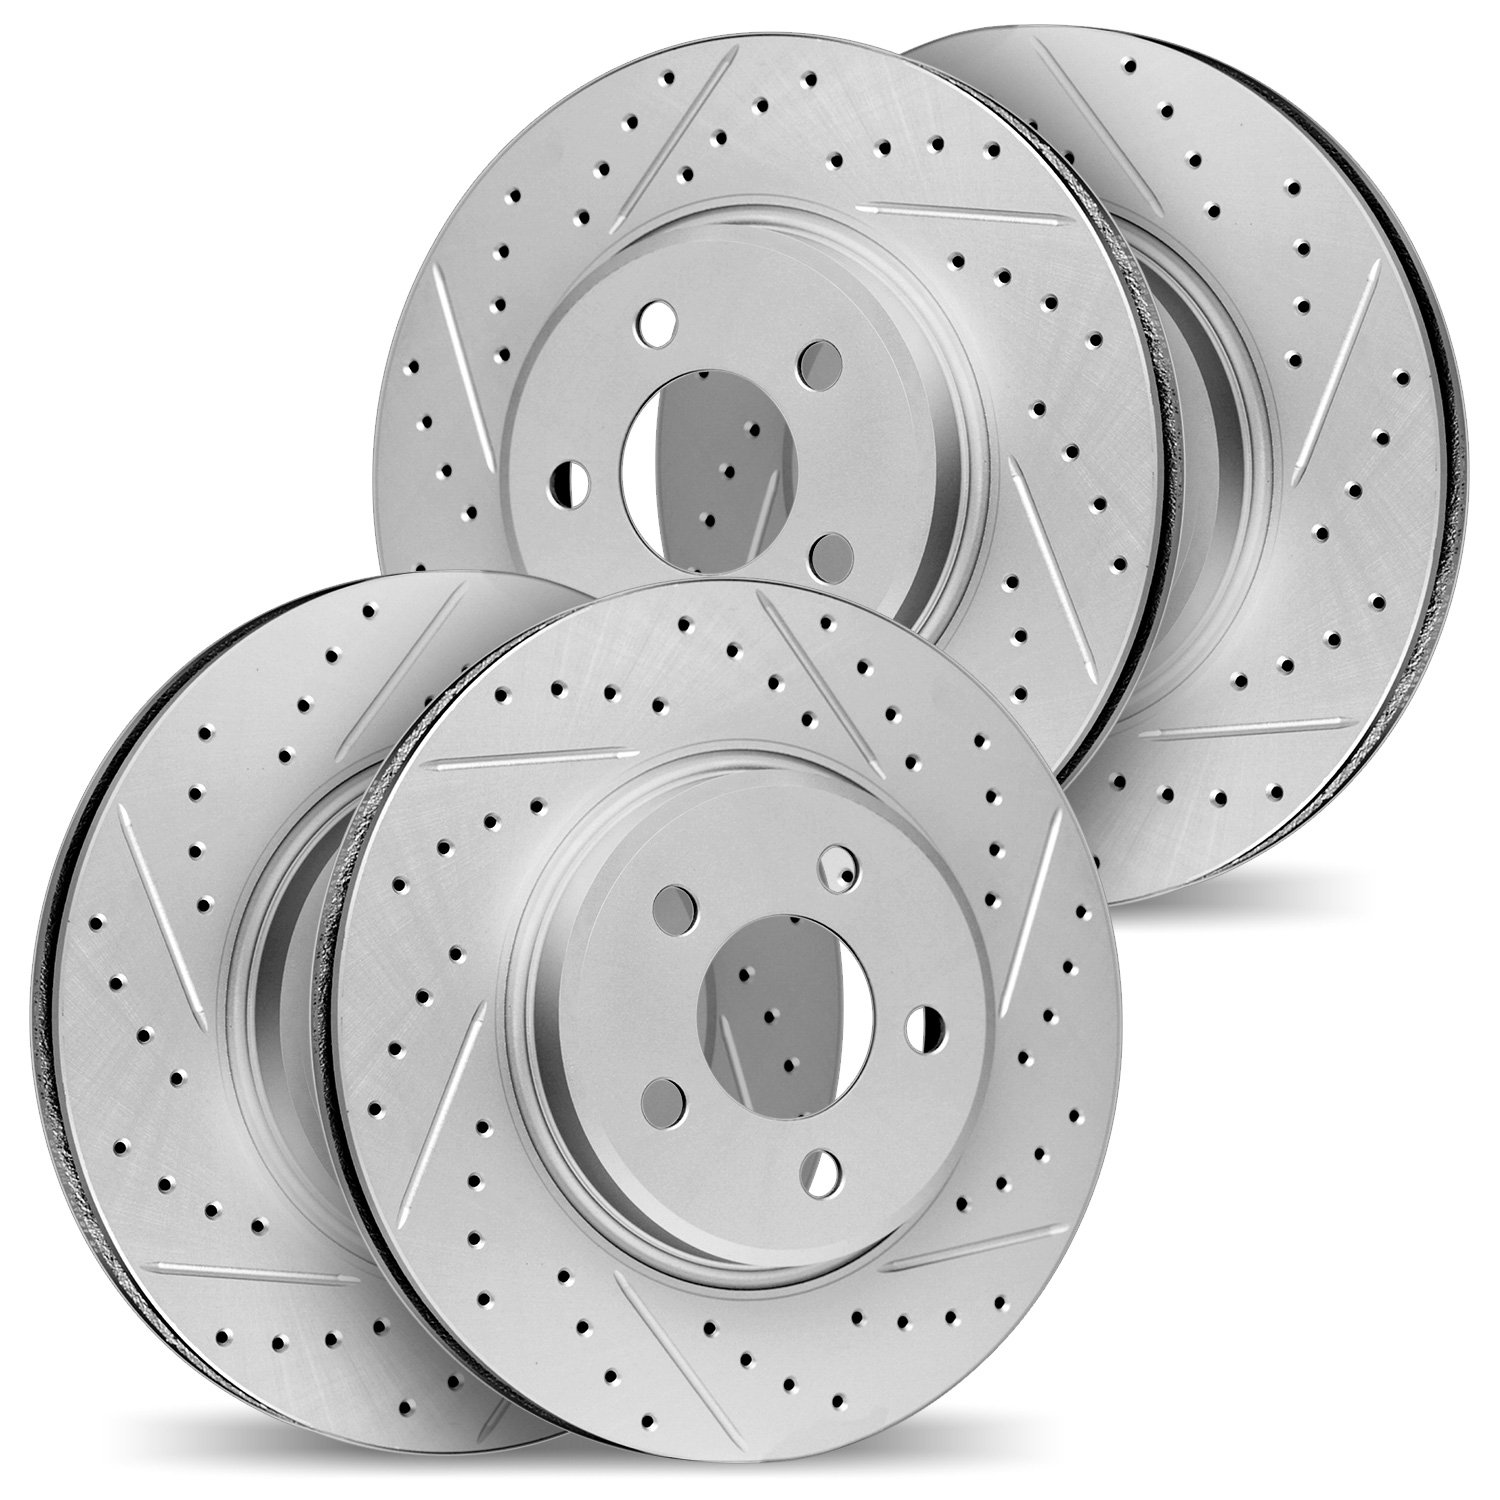 2004-73029 Geoperformance Drilled/Slotted Brake Rotors, 2000-2003 Audi/Volkswagen, Position: Front and Rear